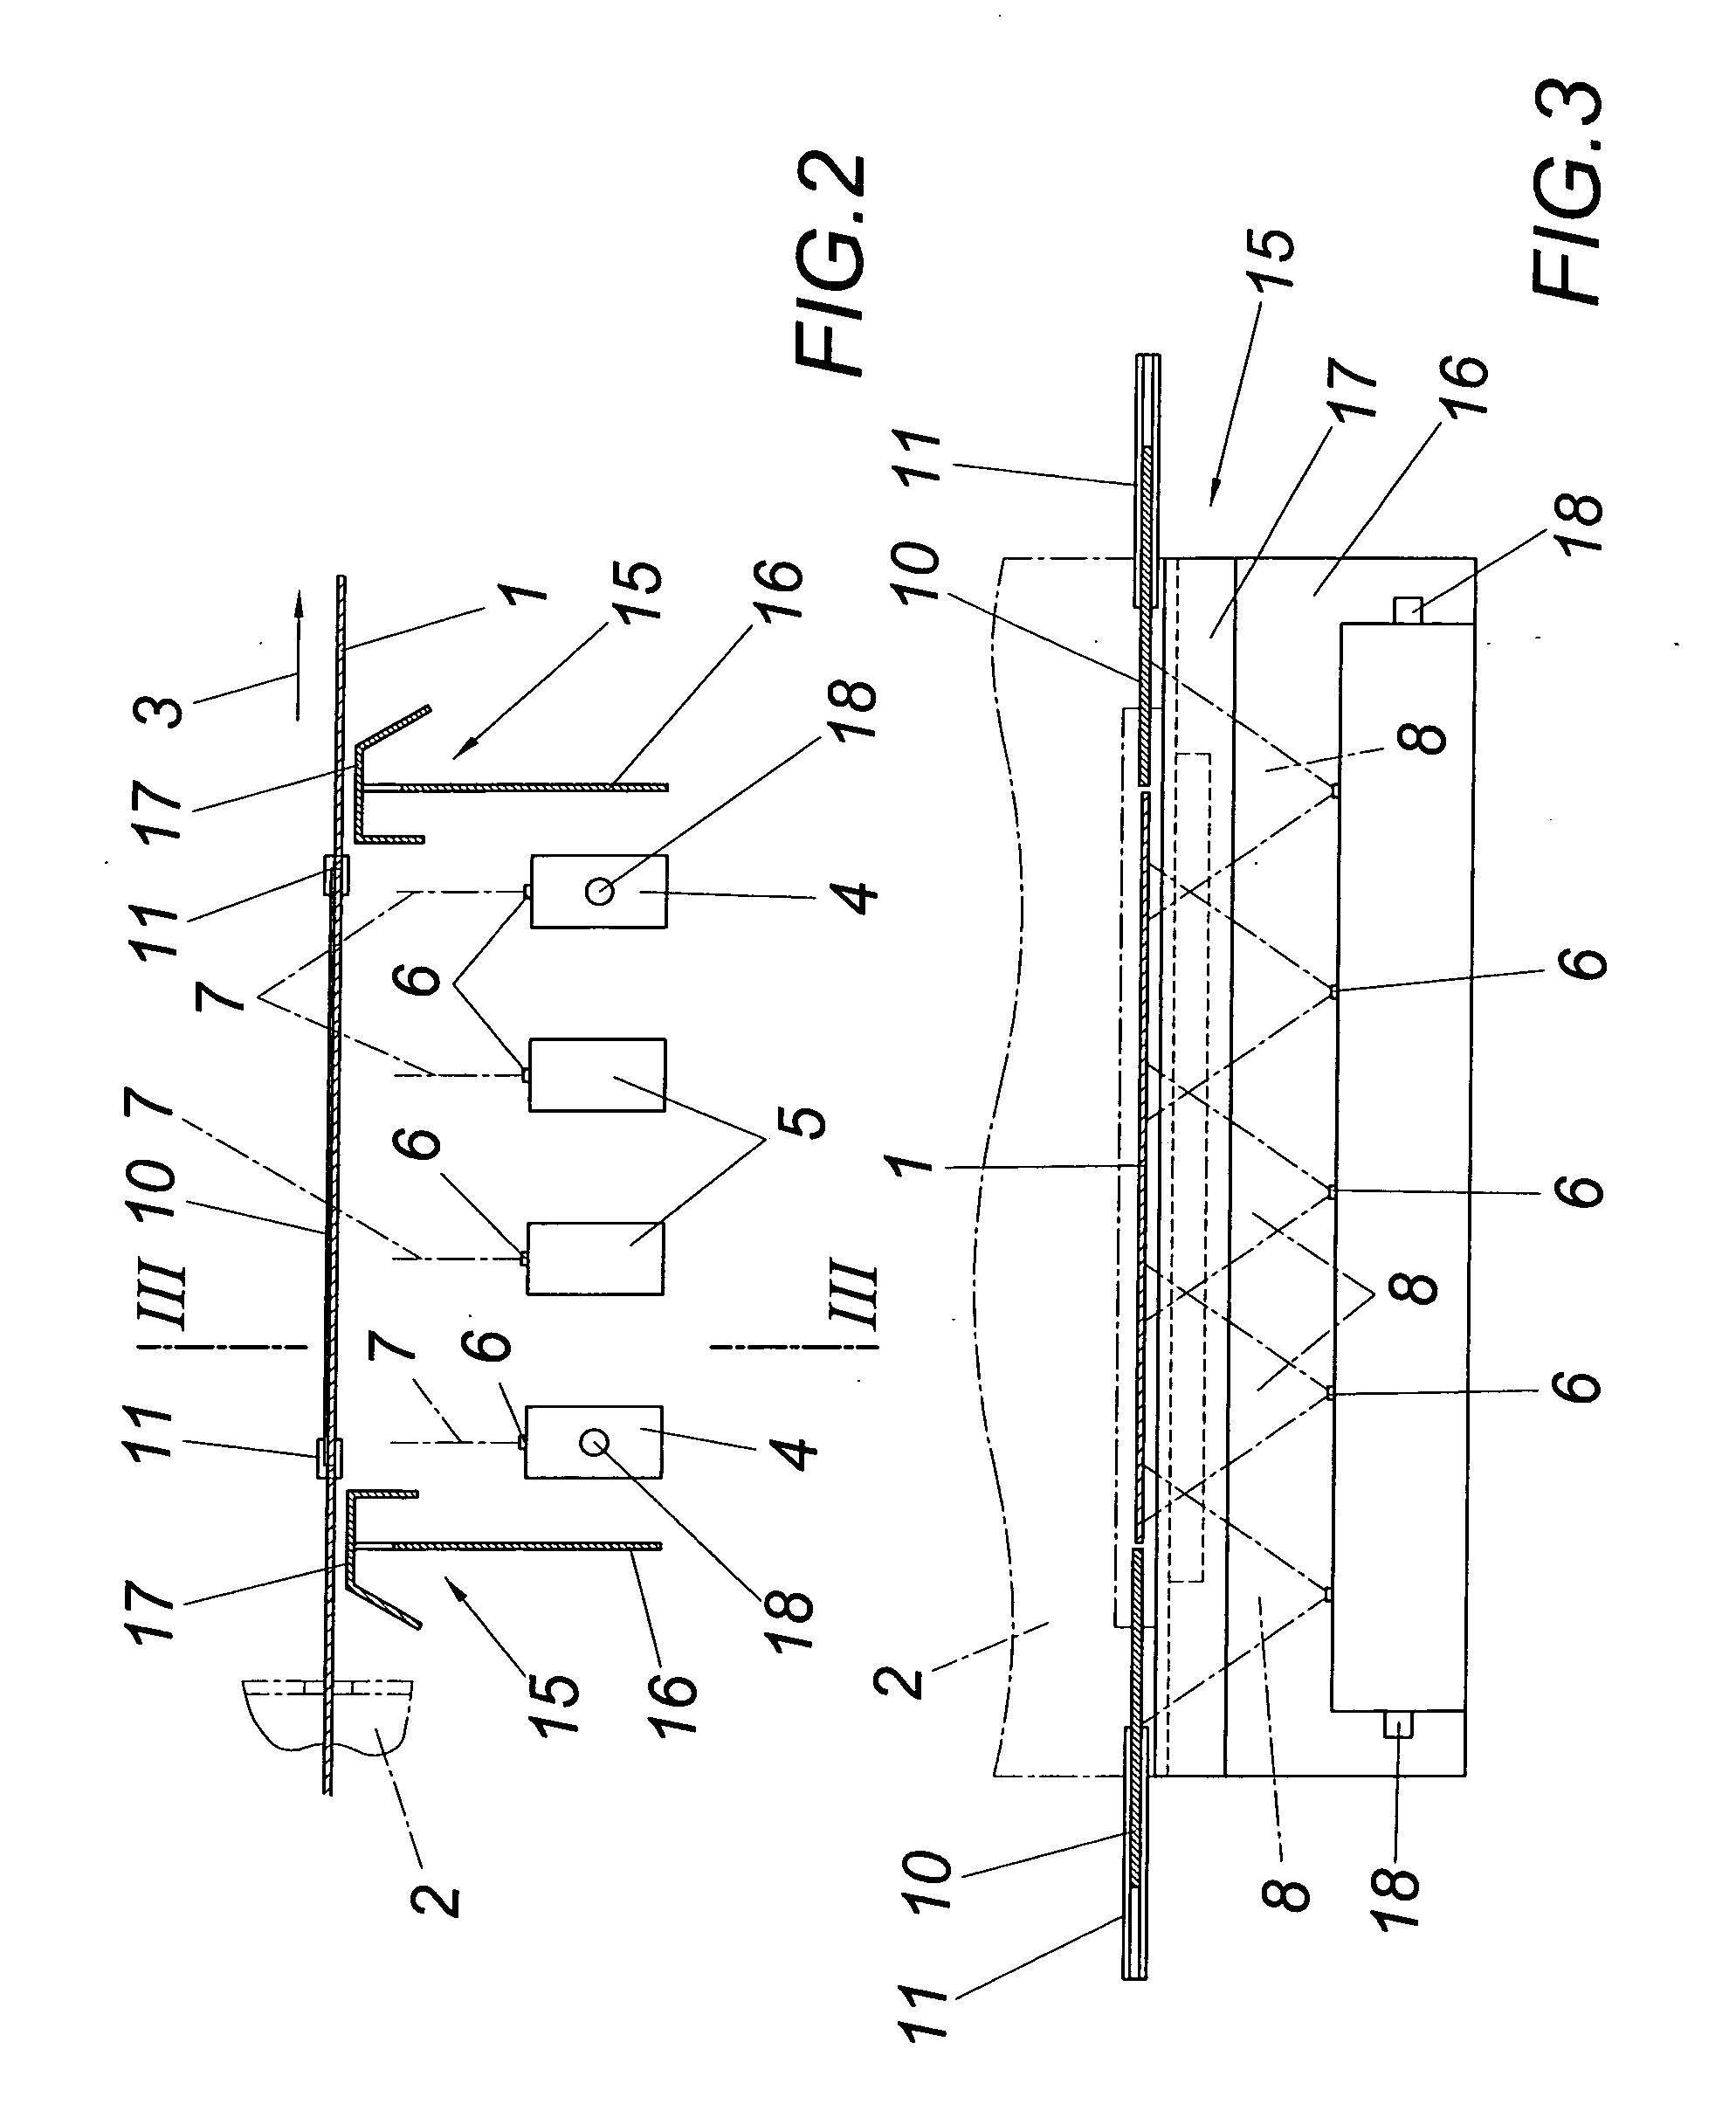 Apparatus for cooling a strip of sheet metal